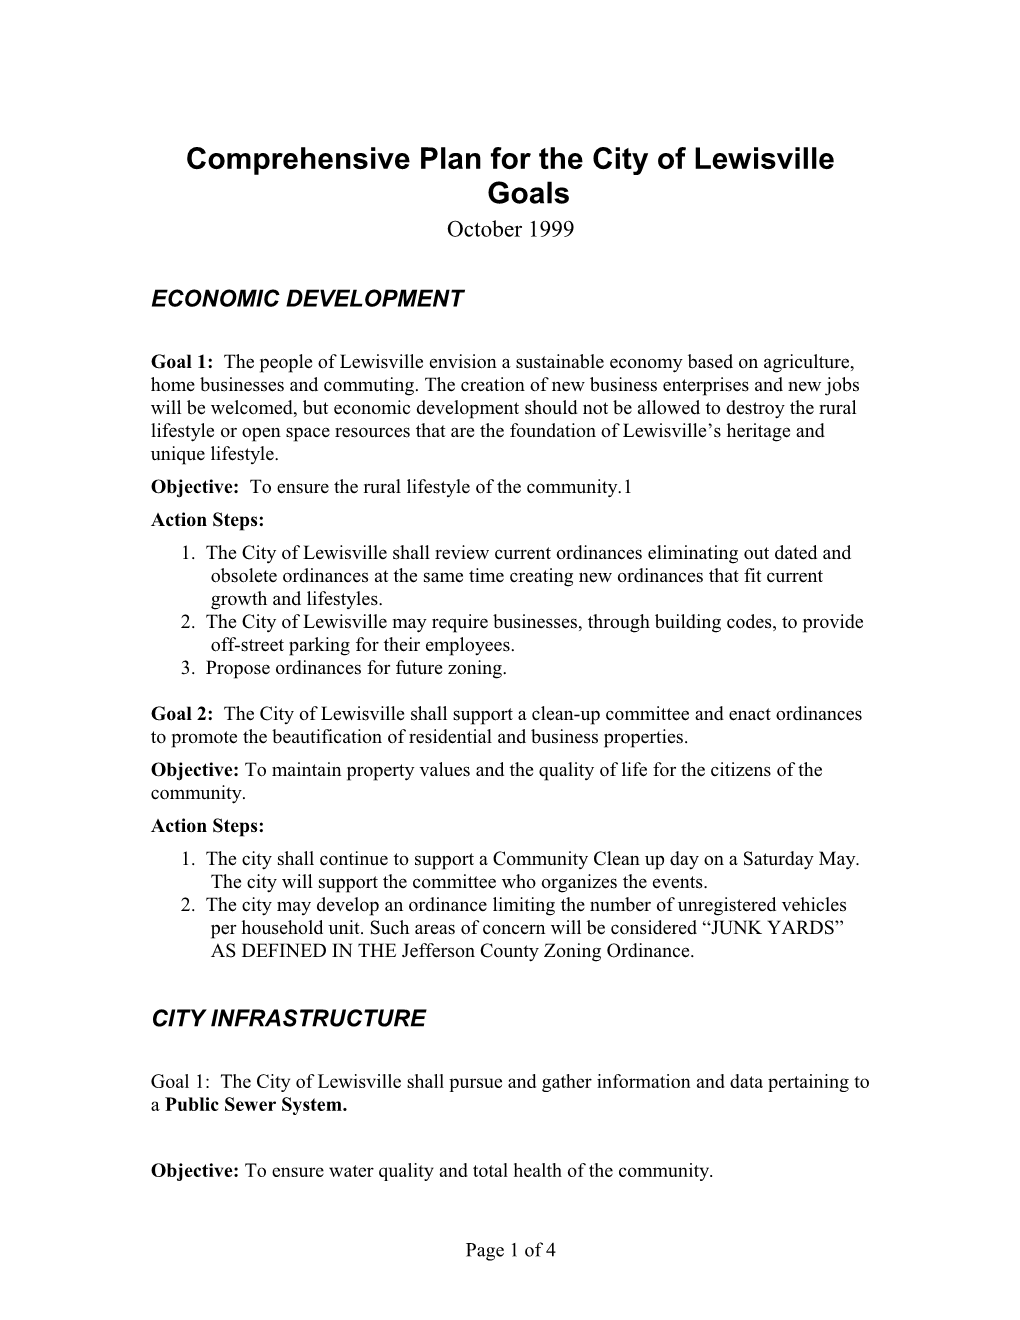 Comprehensive Plan for the City of Lewisville Goals